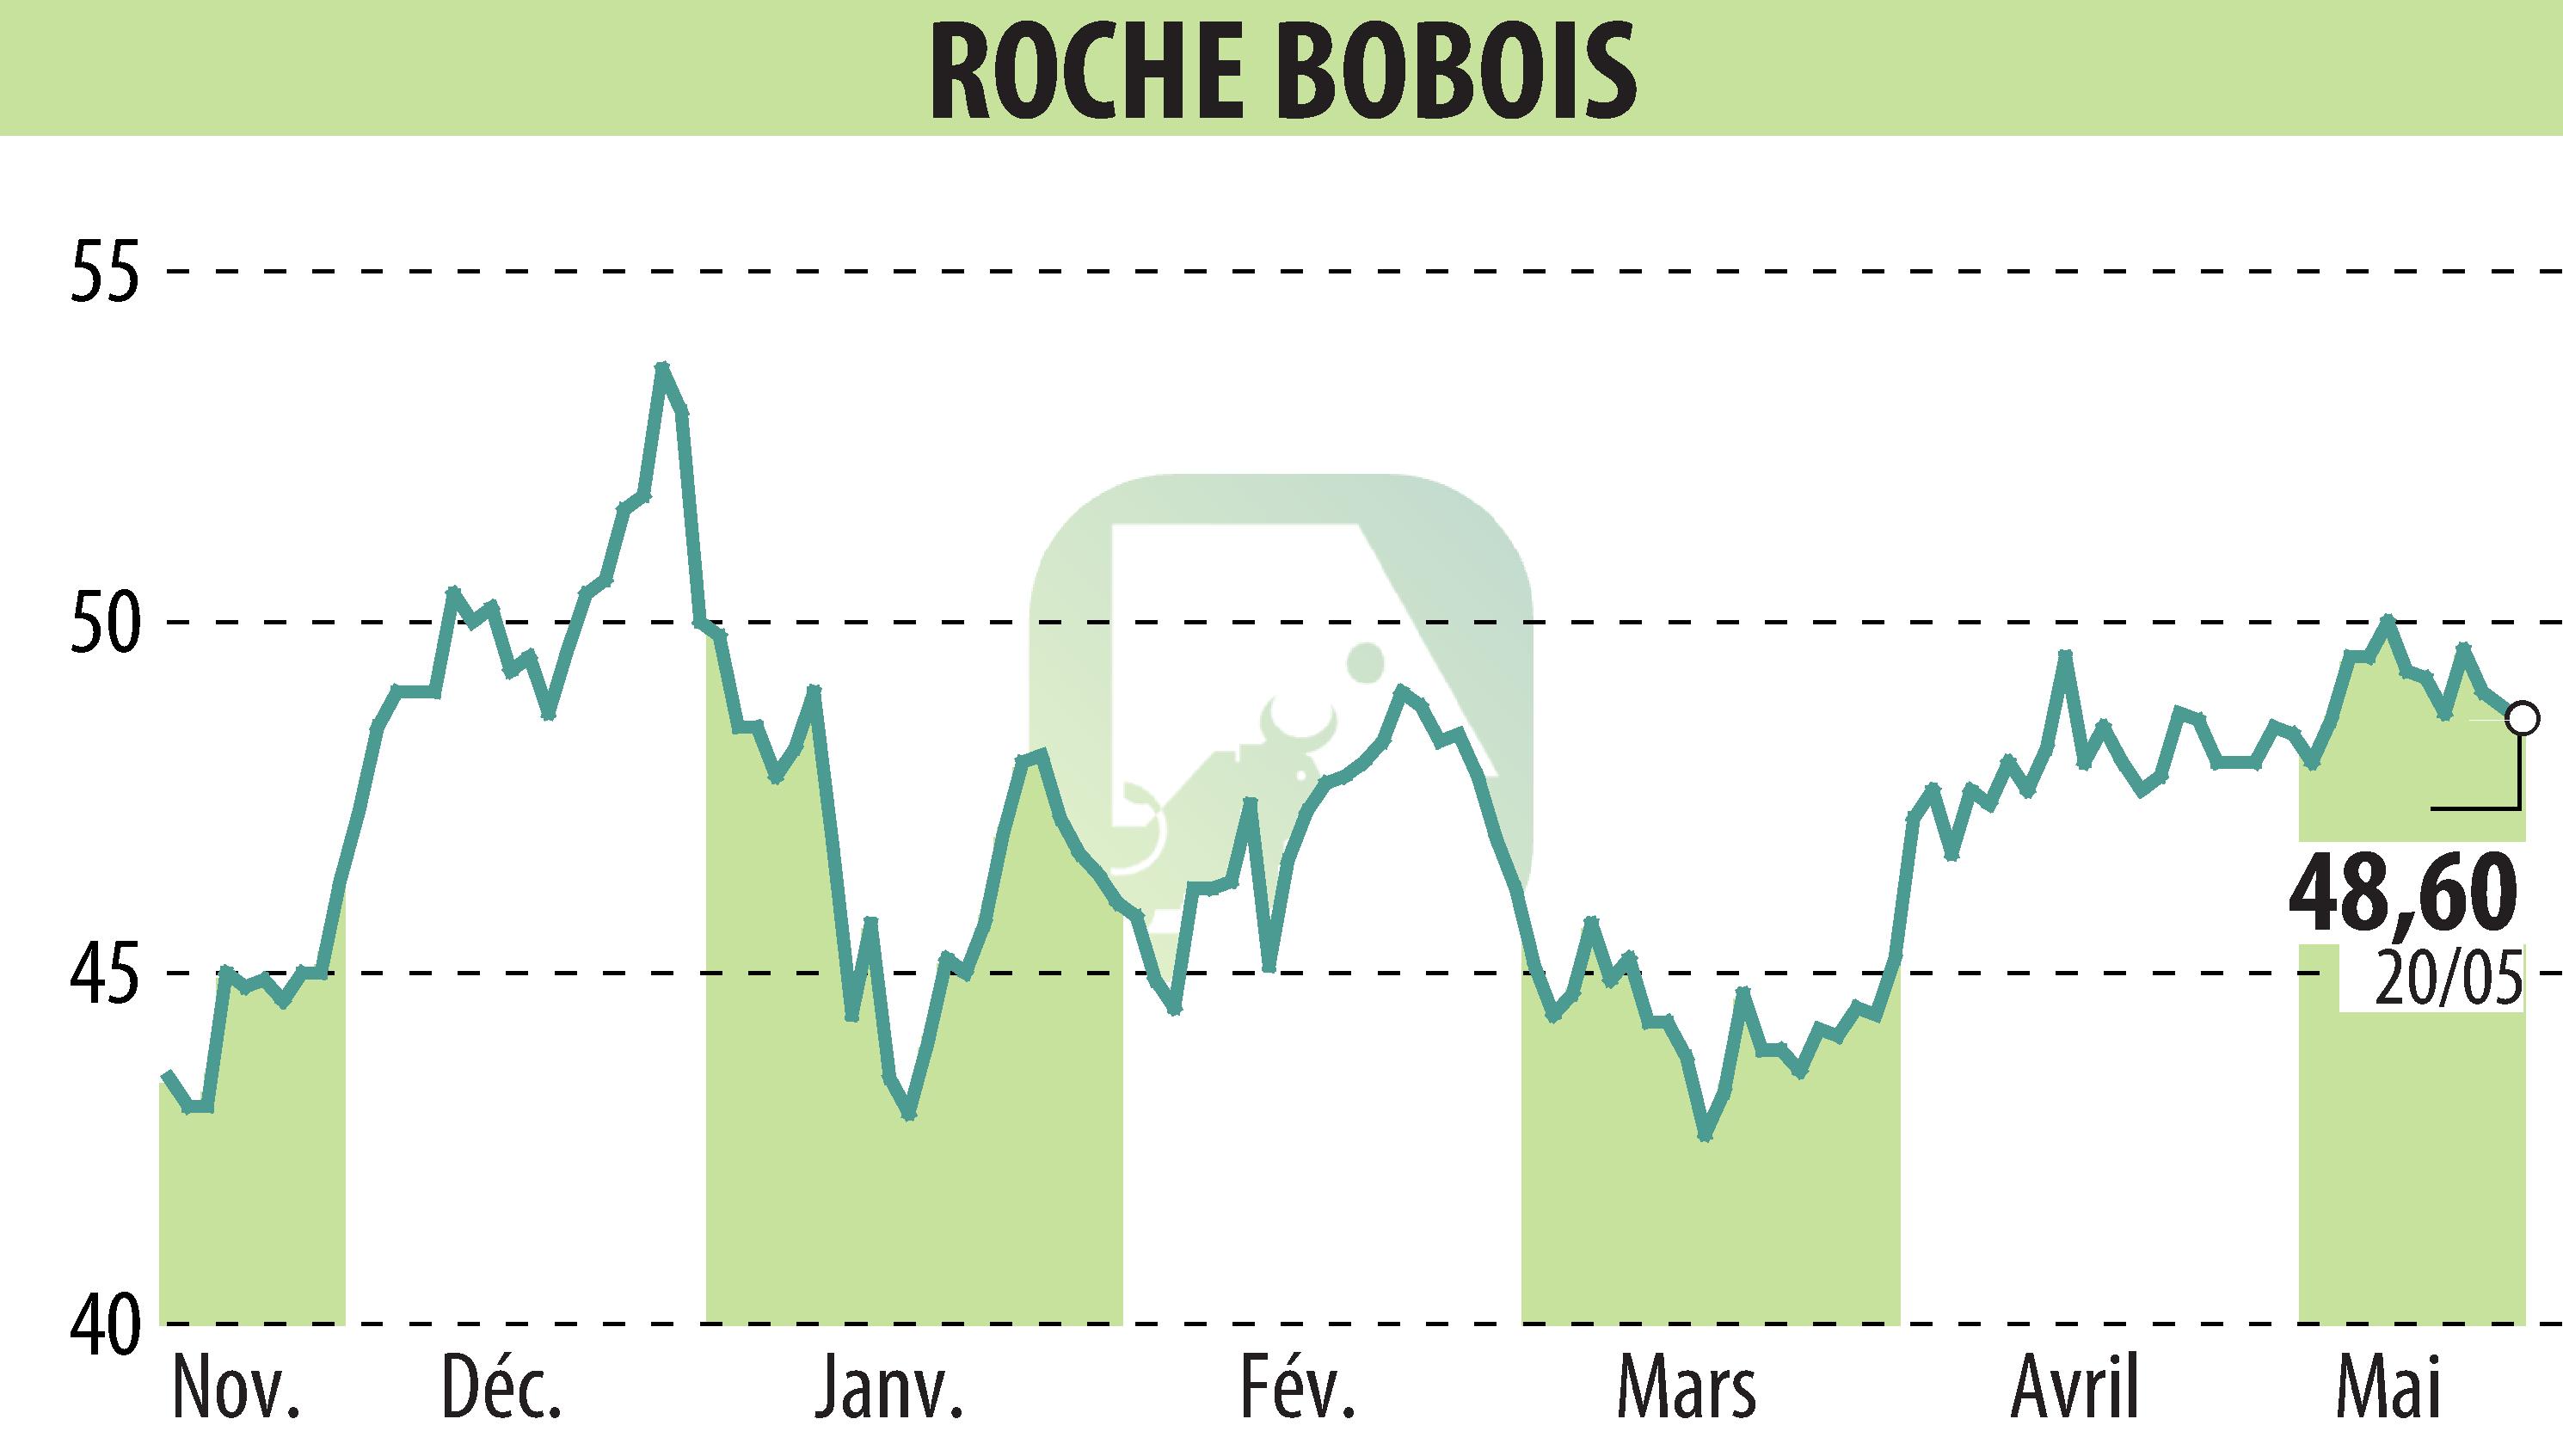 Stock price chart of ROCHE BOBOIS (EPA:RBO) showing fluctuations.